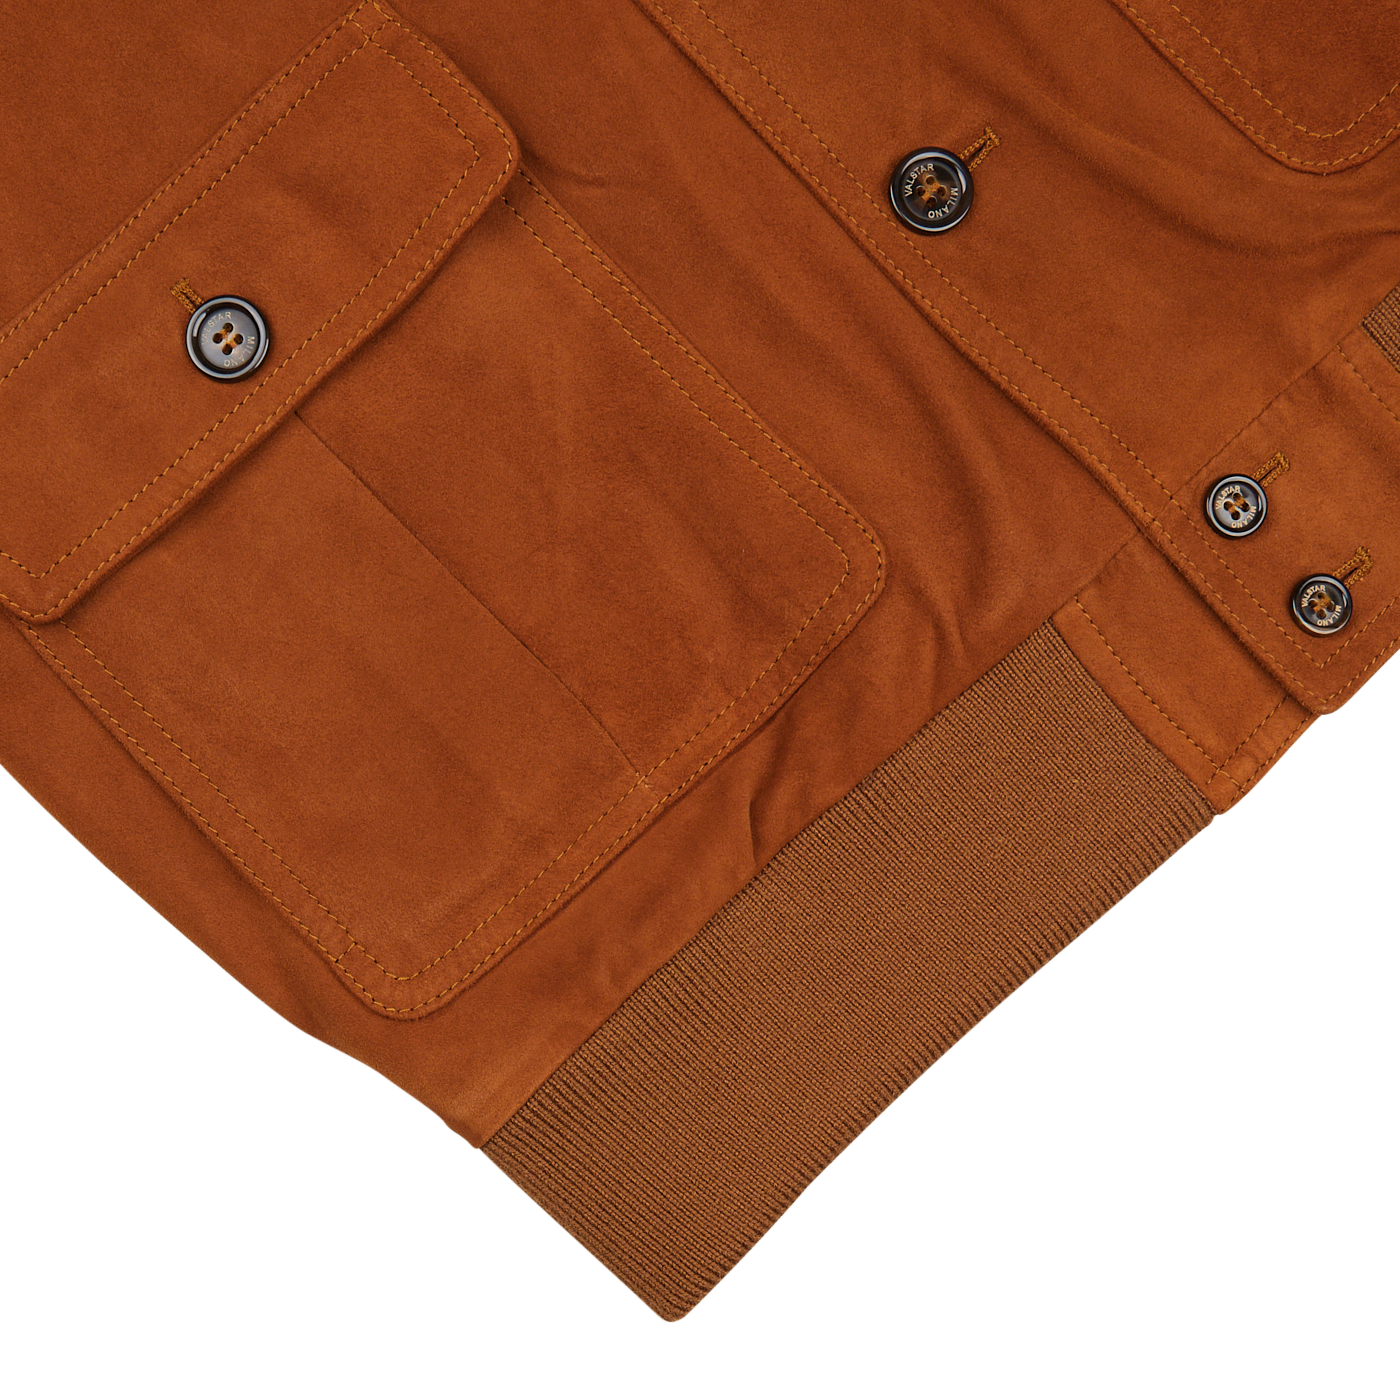 Sandal Brown Suede Leather Valstarino jacket from Valstar with buttons and ribbed cuffs on a white background.